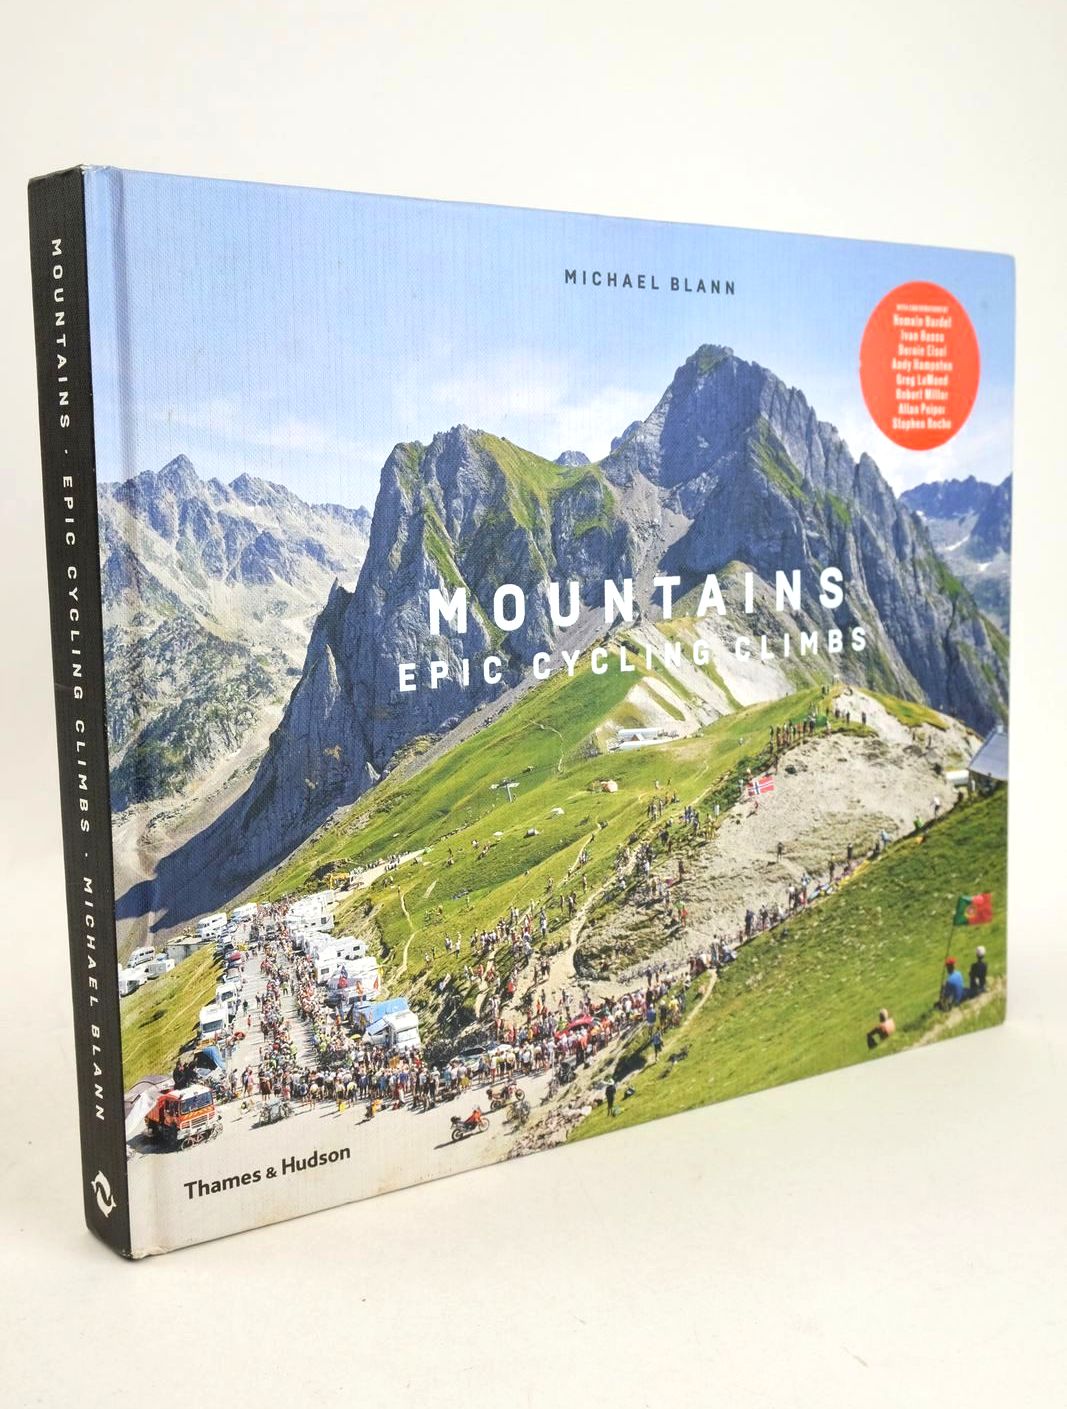 Photo of MOUNTAINS: EPIC CYCLING CLIMBS- Stock Number: 1327820